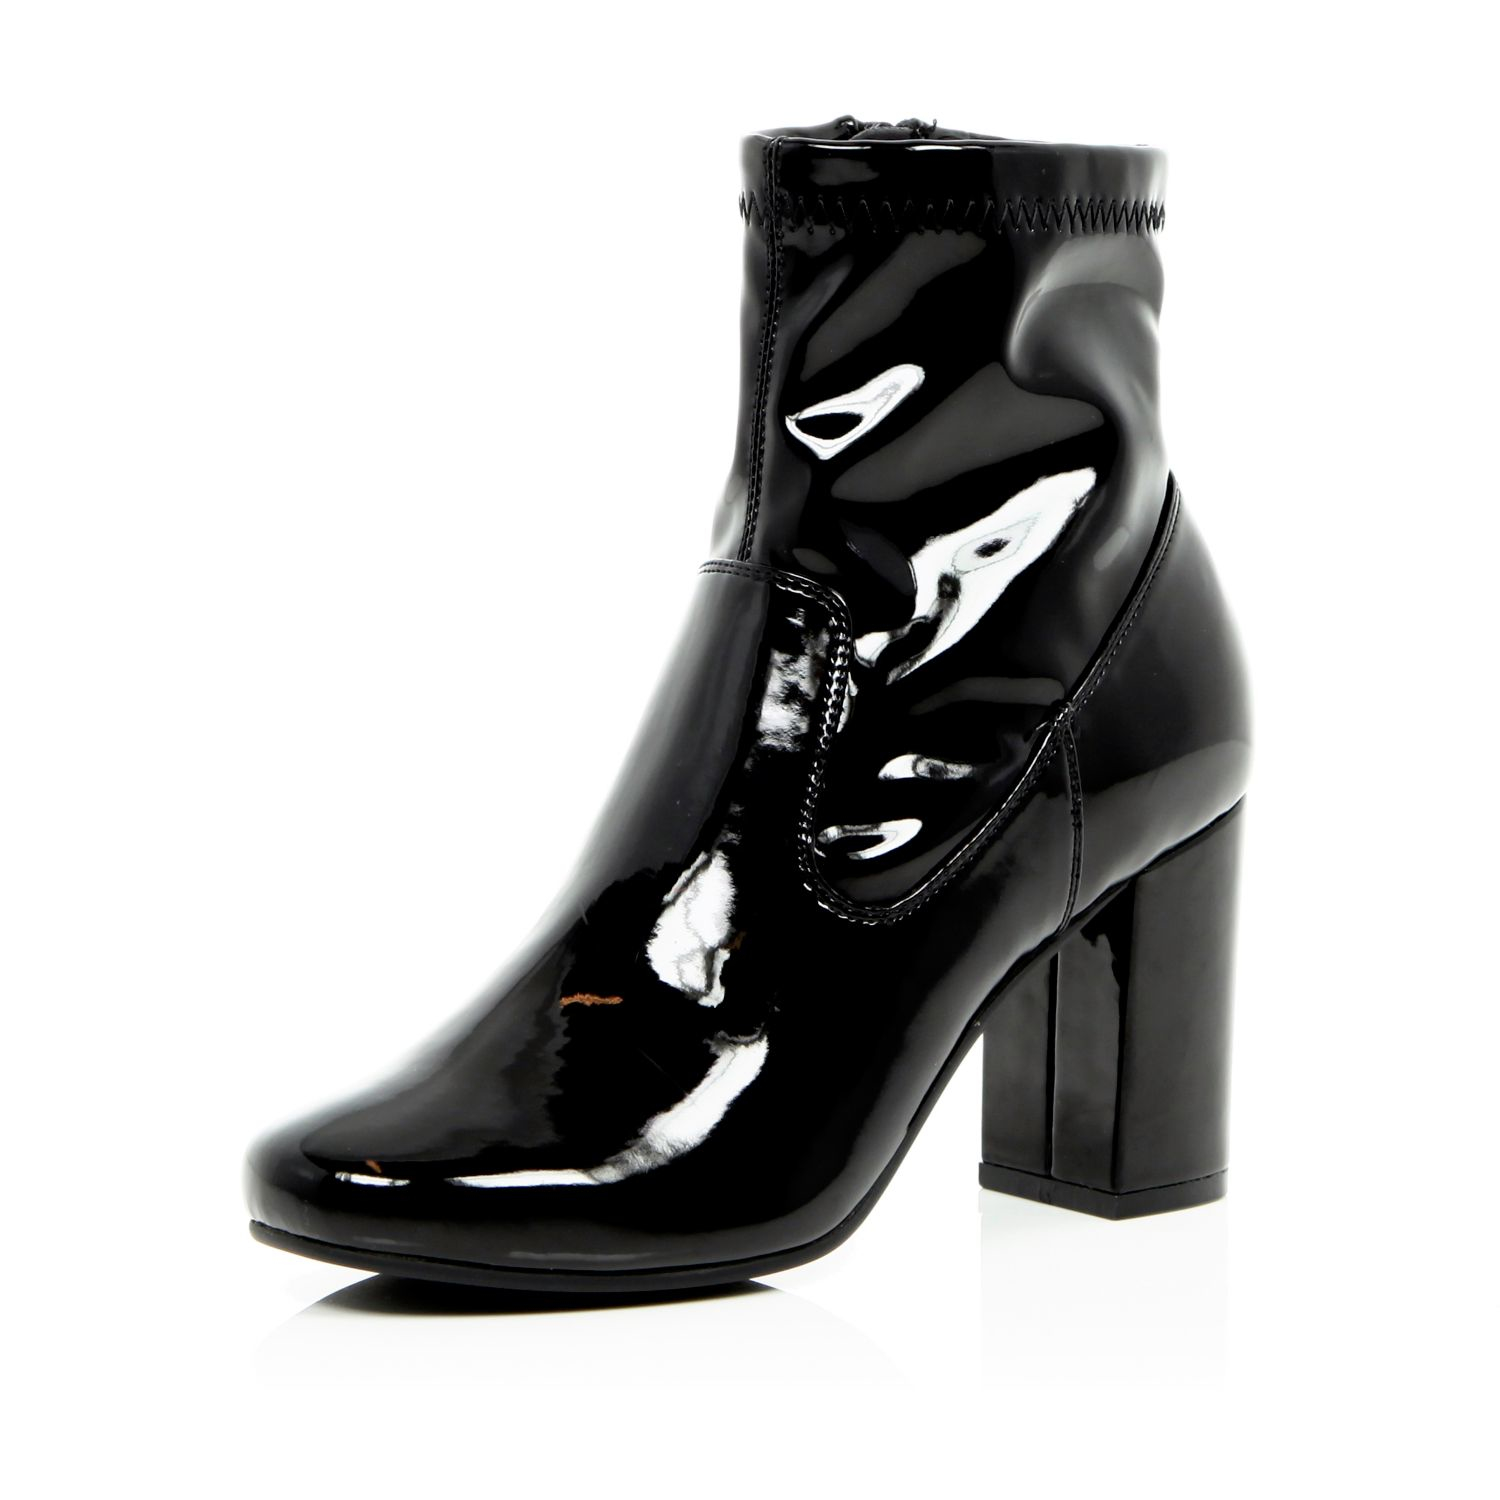 black patent high heel ankle boots